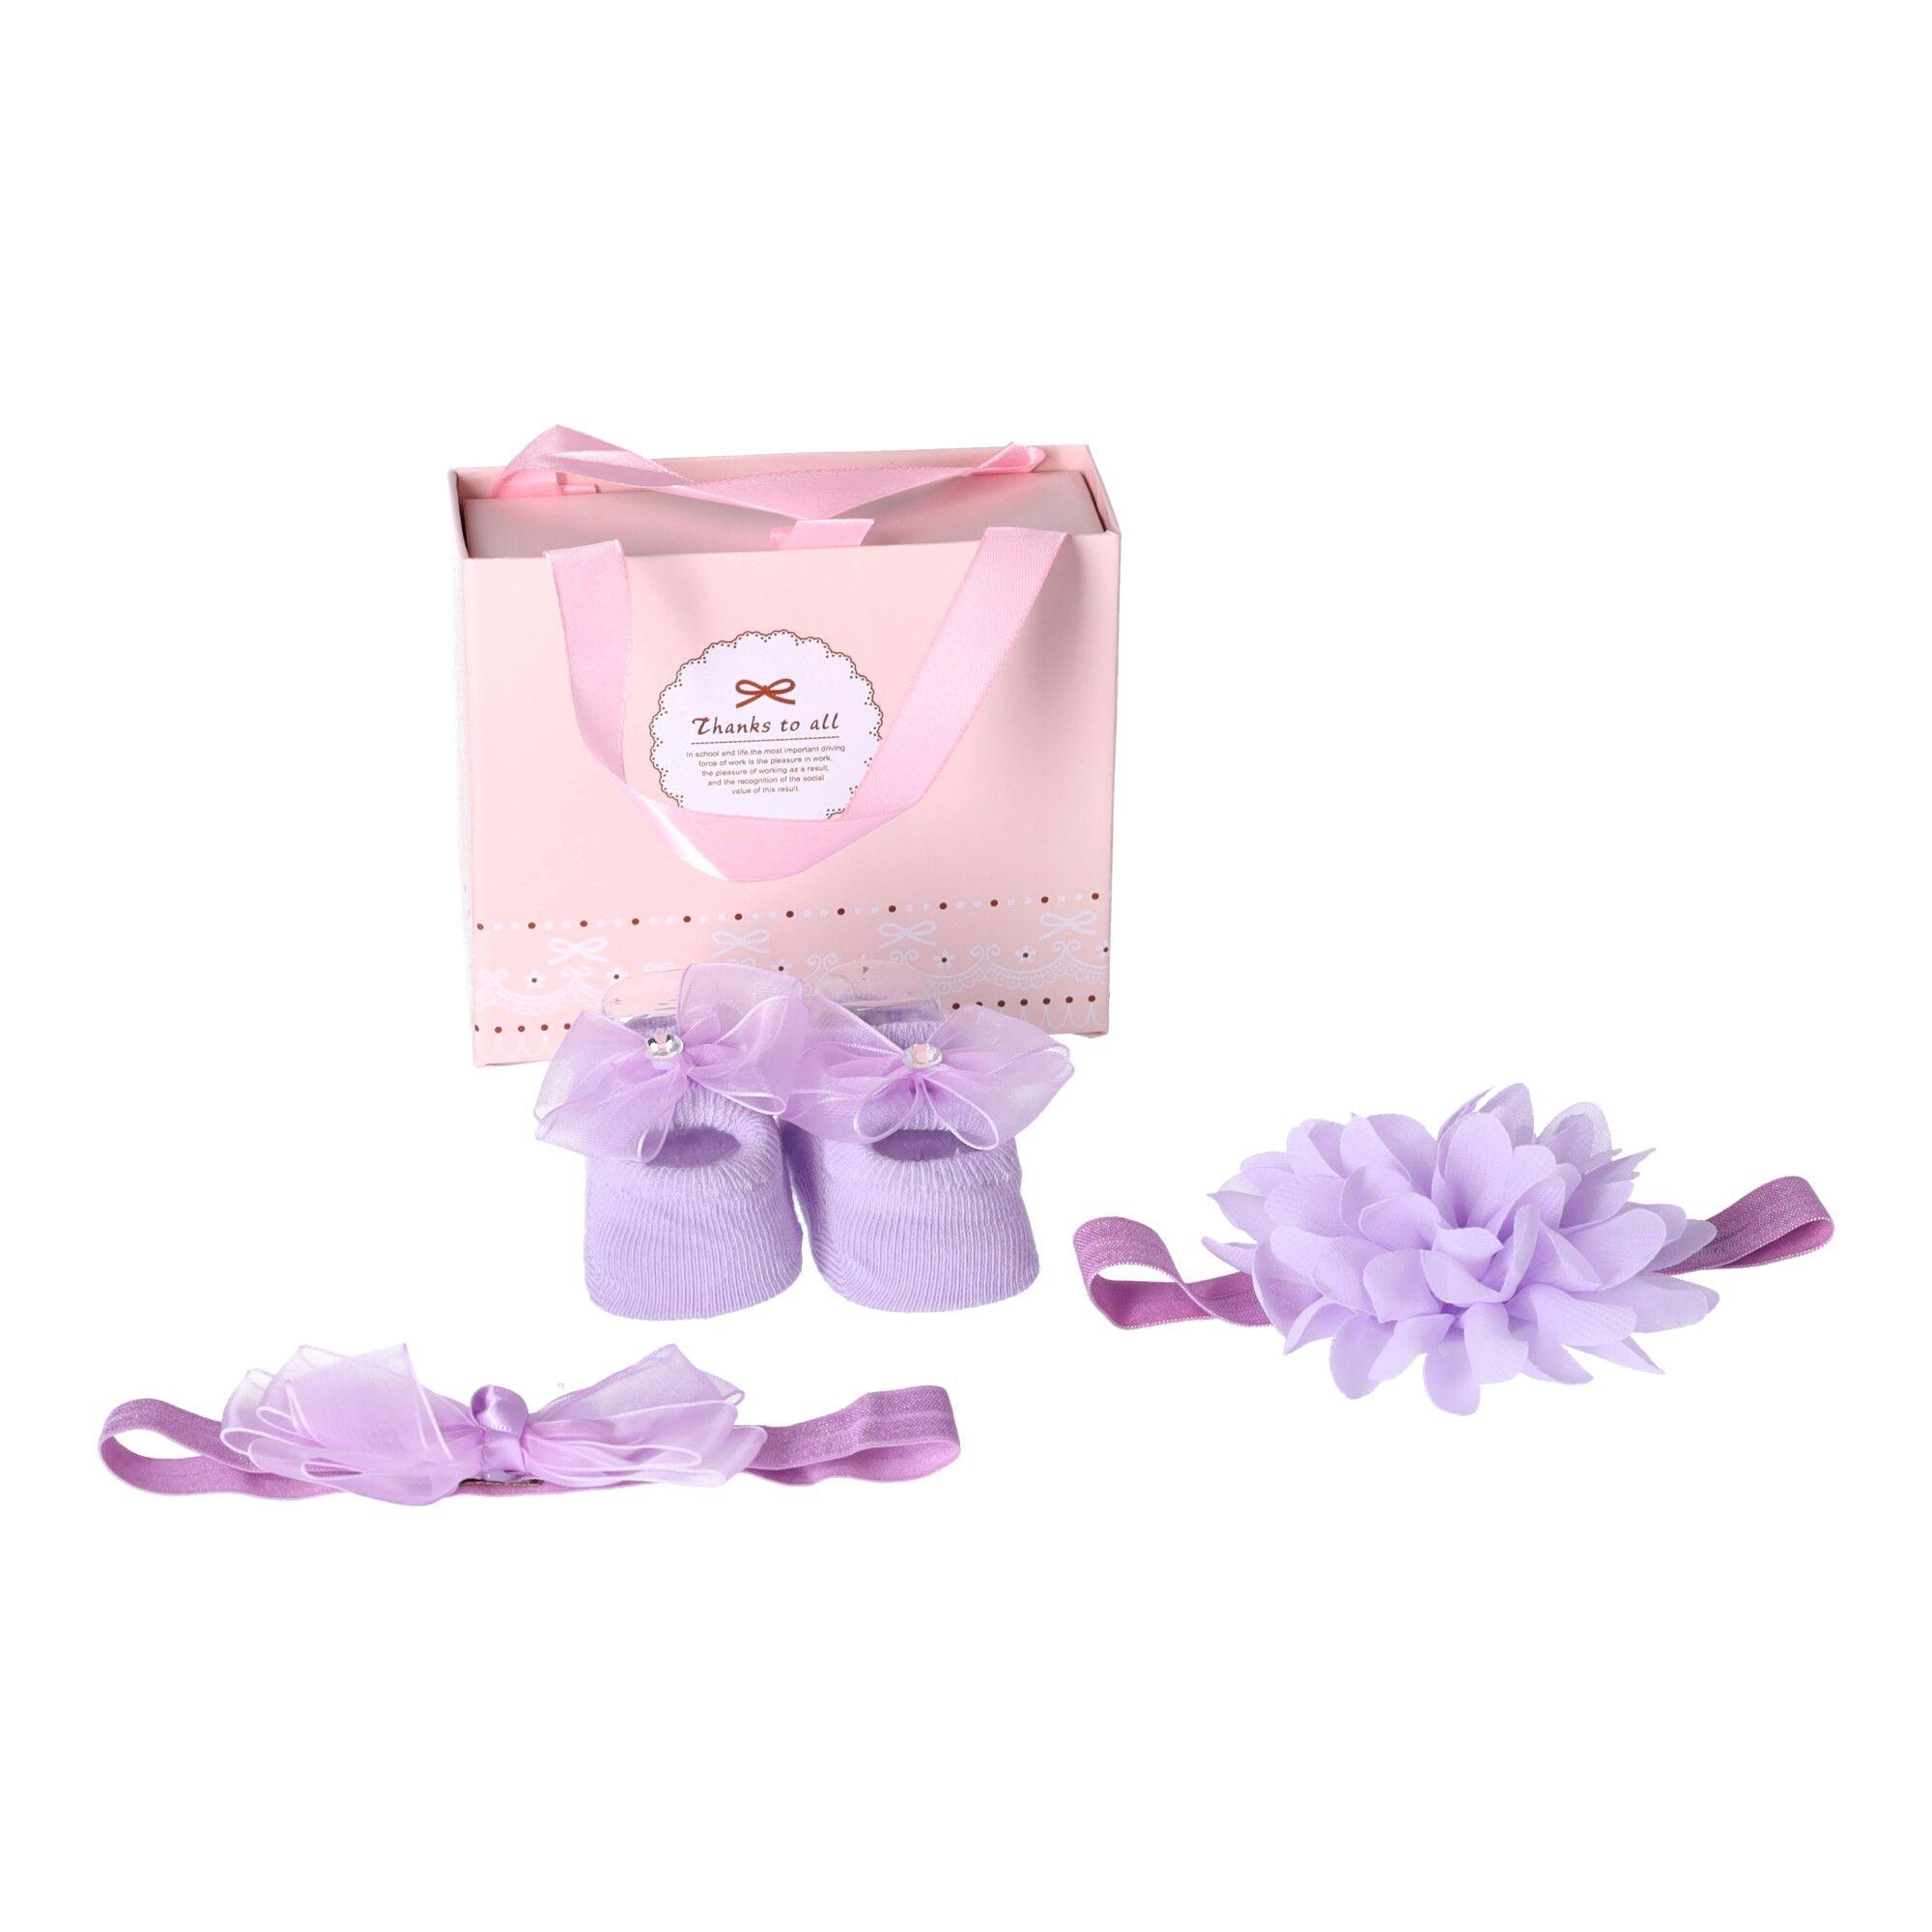 Gift set 3in1 for a newborn baby - purple